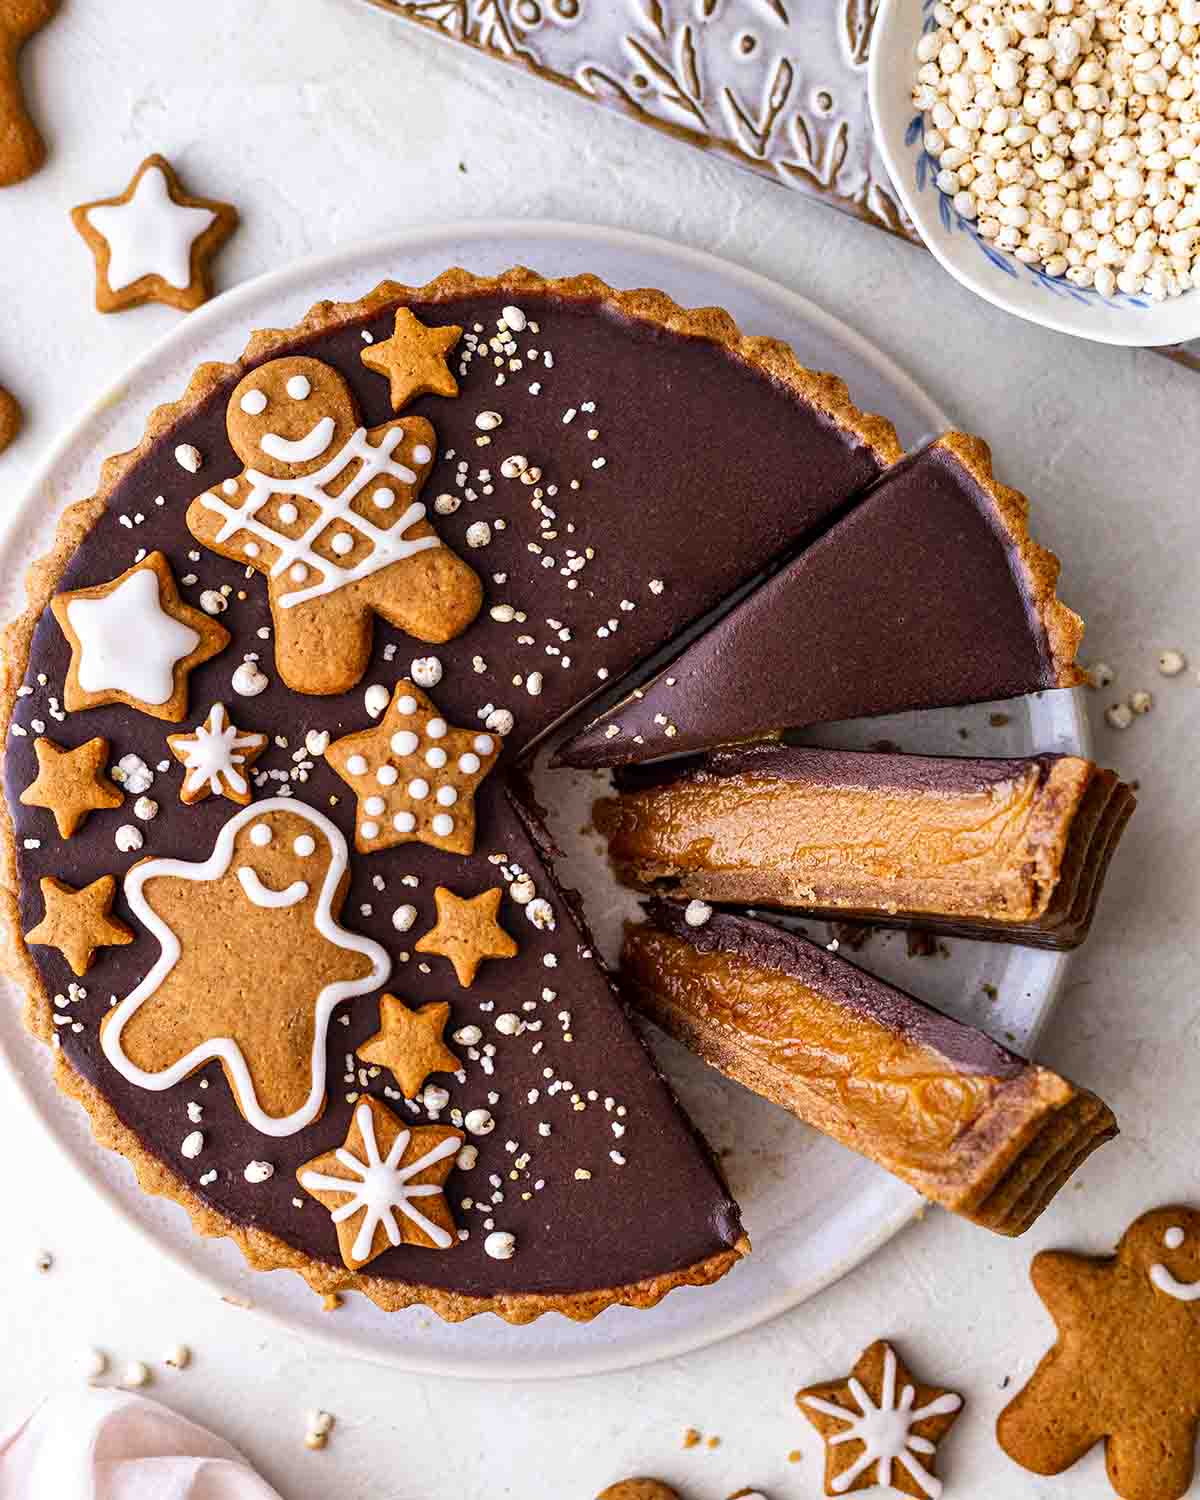 Vegan caramel tart with spiced crust and chocolate topping decorated with gingerbread cookies. The tart is on a plate with a few slices coming out showing gooey filling.